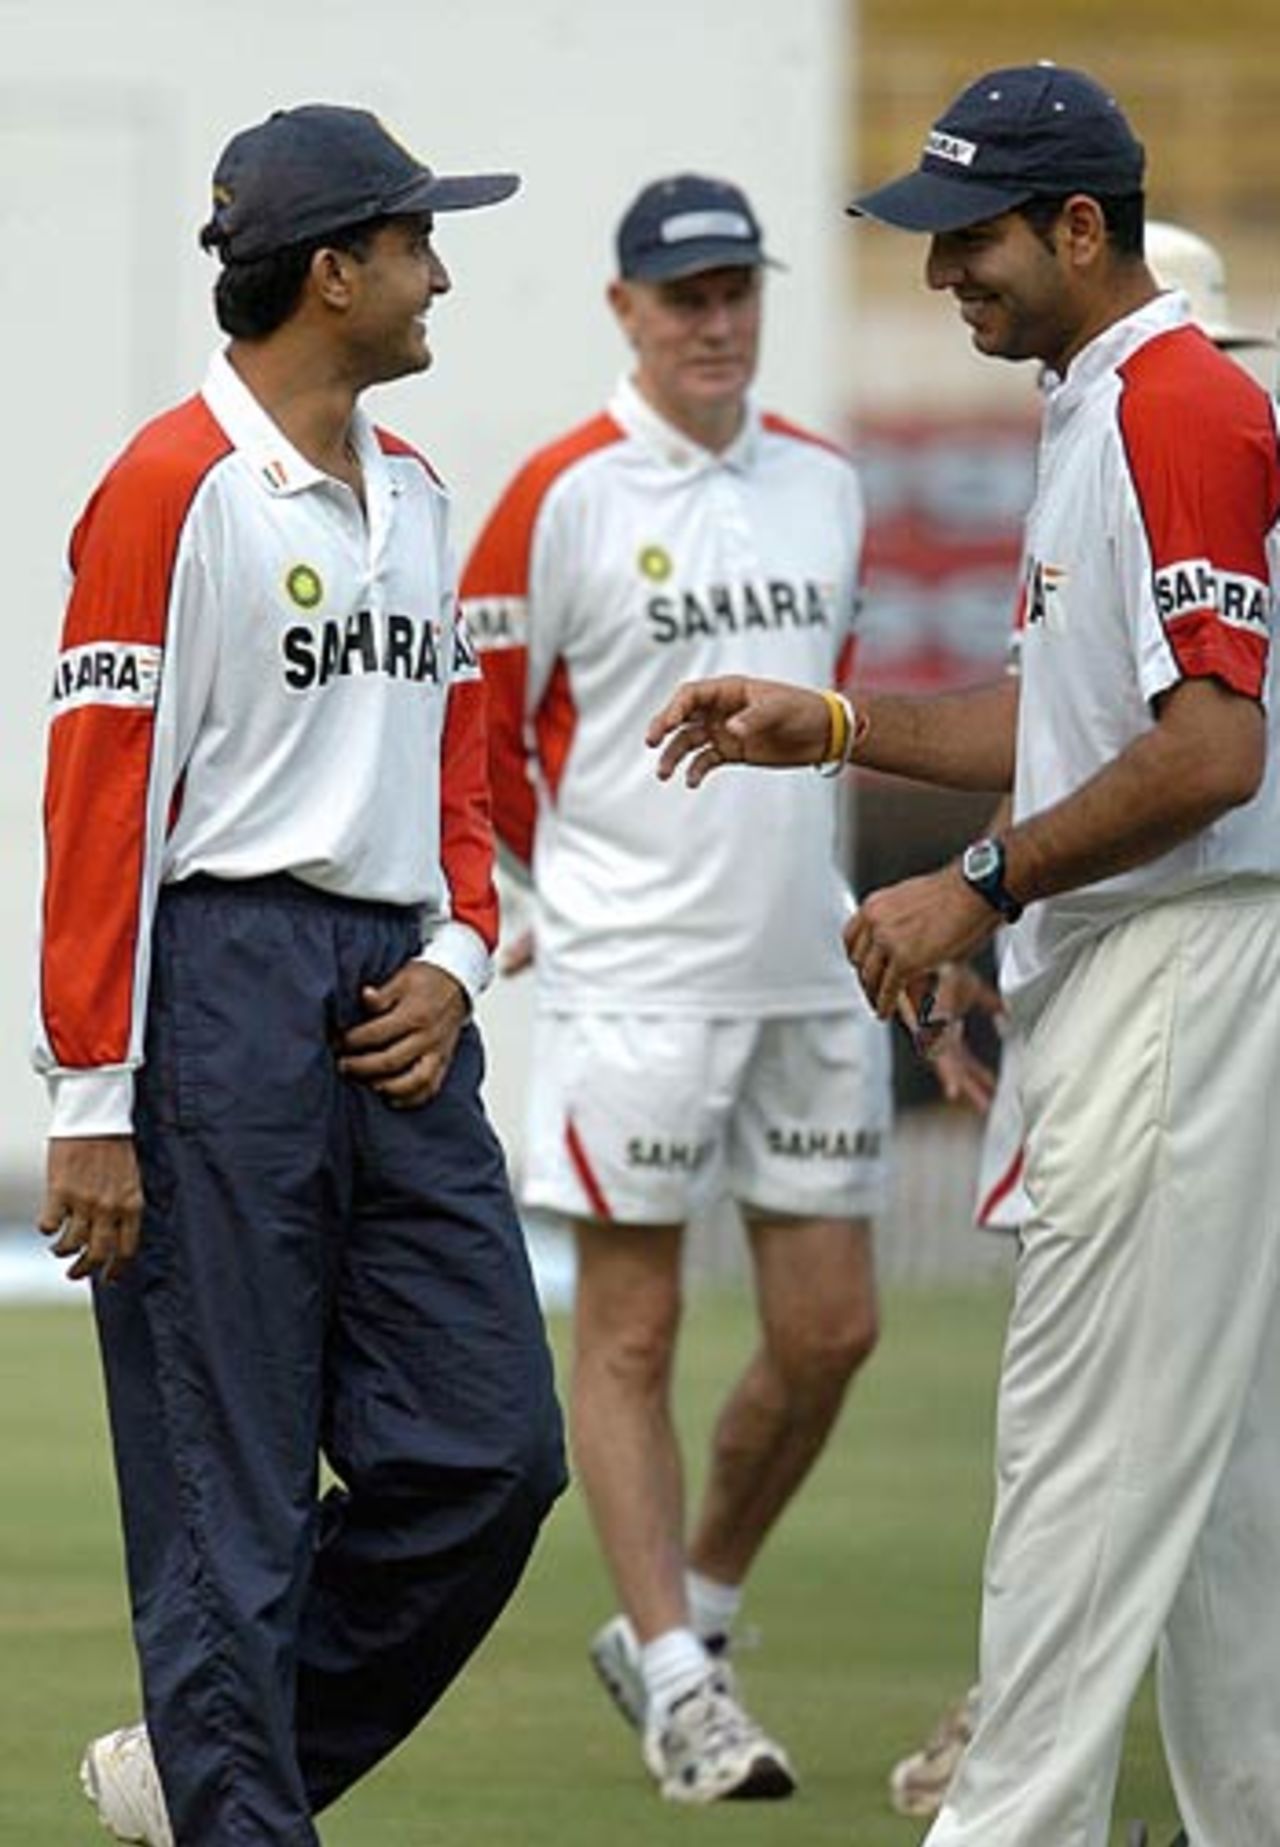 Sourav Ganguly shares a lighter moment with Yuvraj Singh as Greg Chappell looks on, Chennai, November 30, 2005